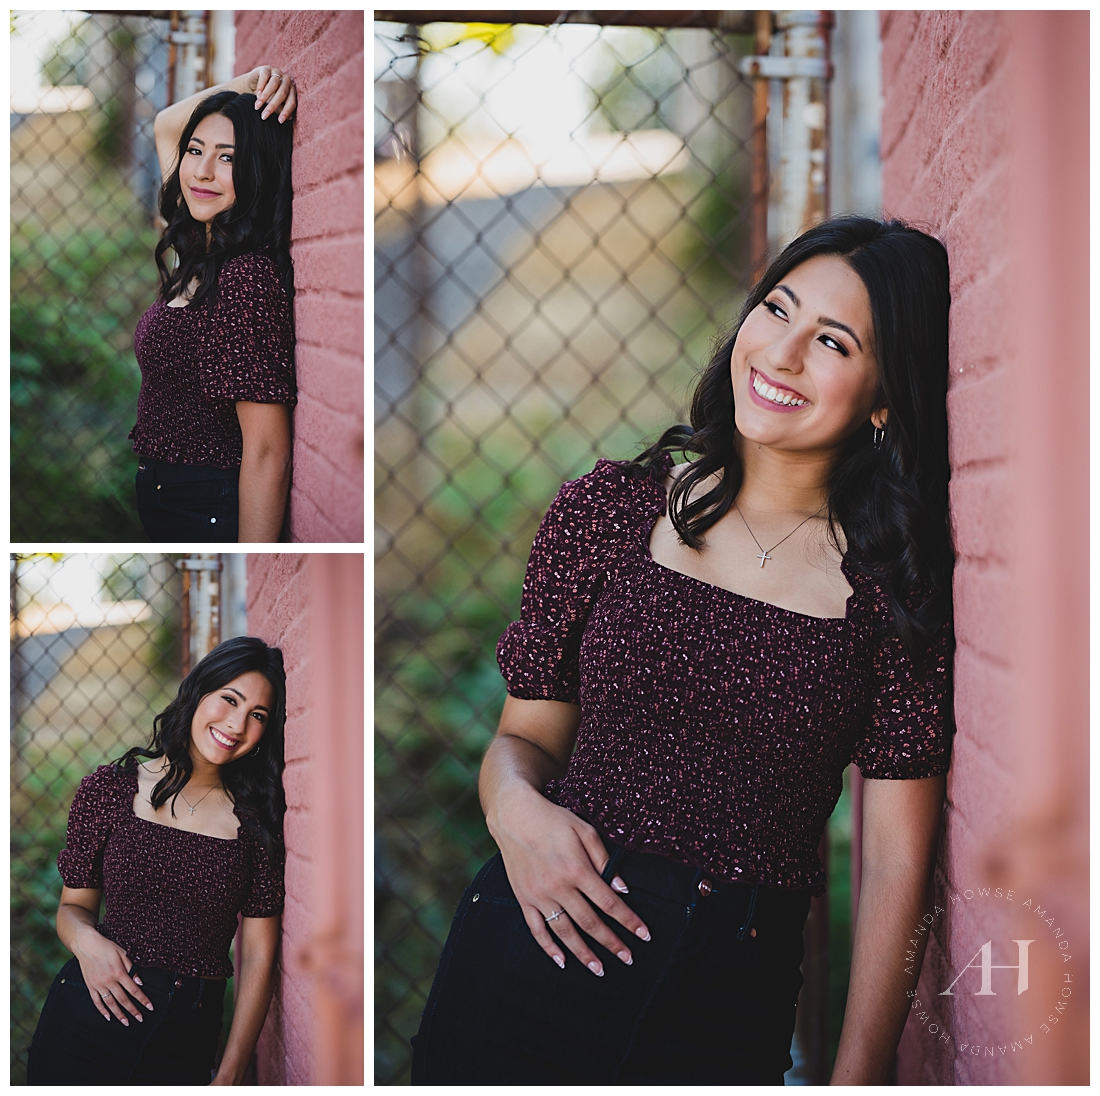 Urban Style Style Photoshoot in Tacoma | Rustic Red Backdrops | Photographed by the Best Tacoma Senior Portrait Photographer Amanda Howse Photography